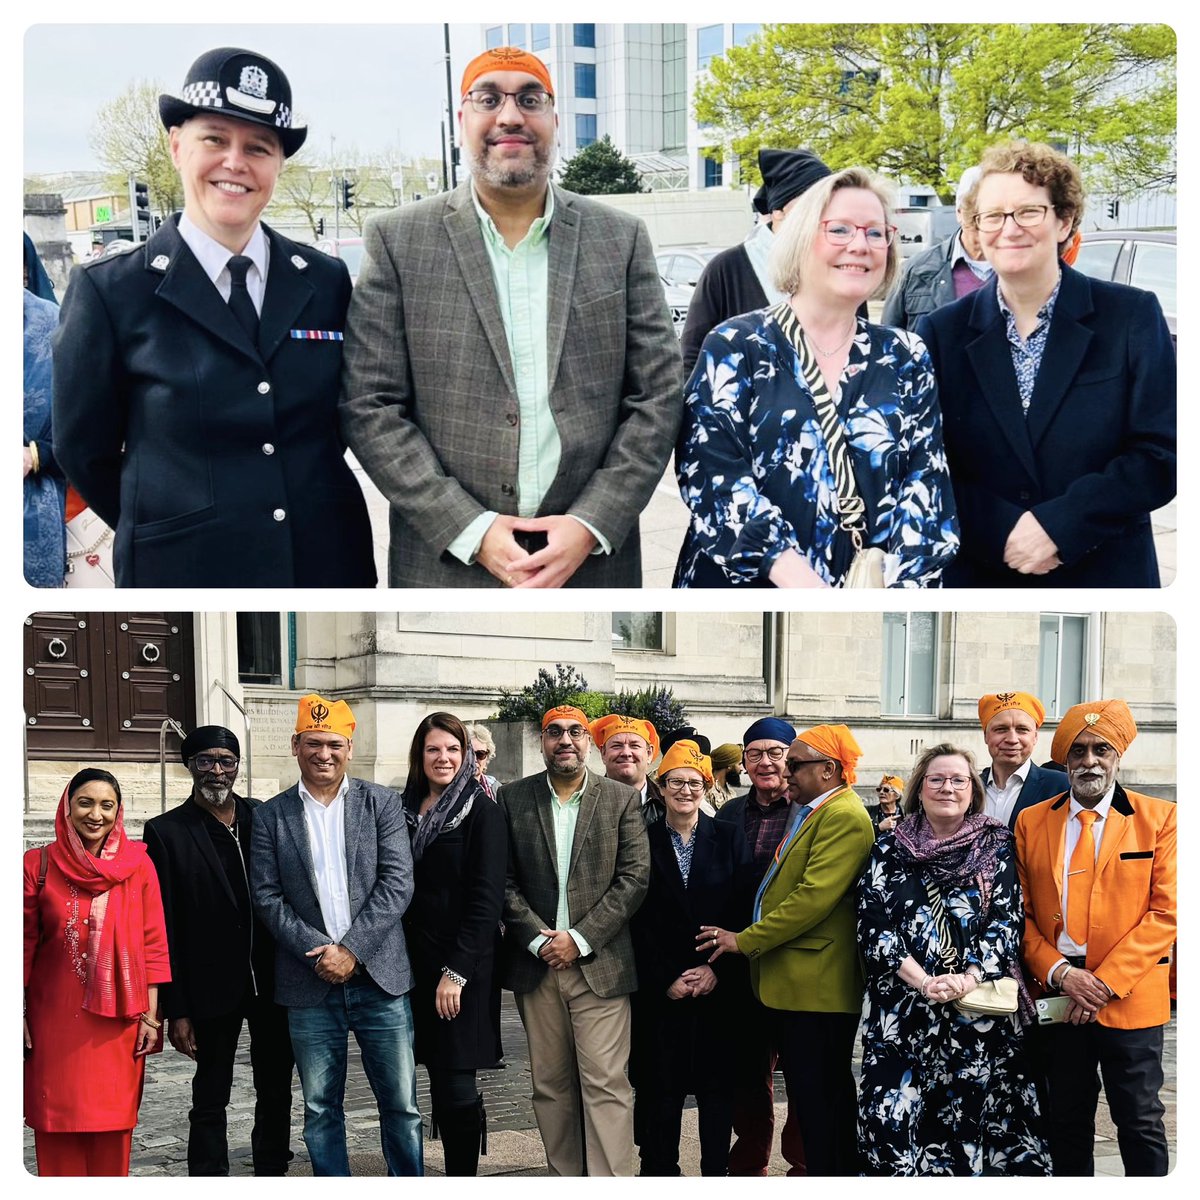 Celebrating #Vaisakhi in #Southampton with the local Sikh community, colleagues, friends and key stakeholders. Lots of energy and buzz at the annual nagar kirtan procession!